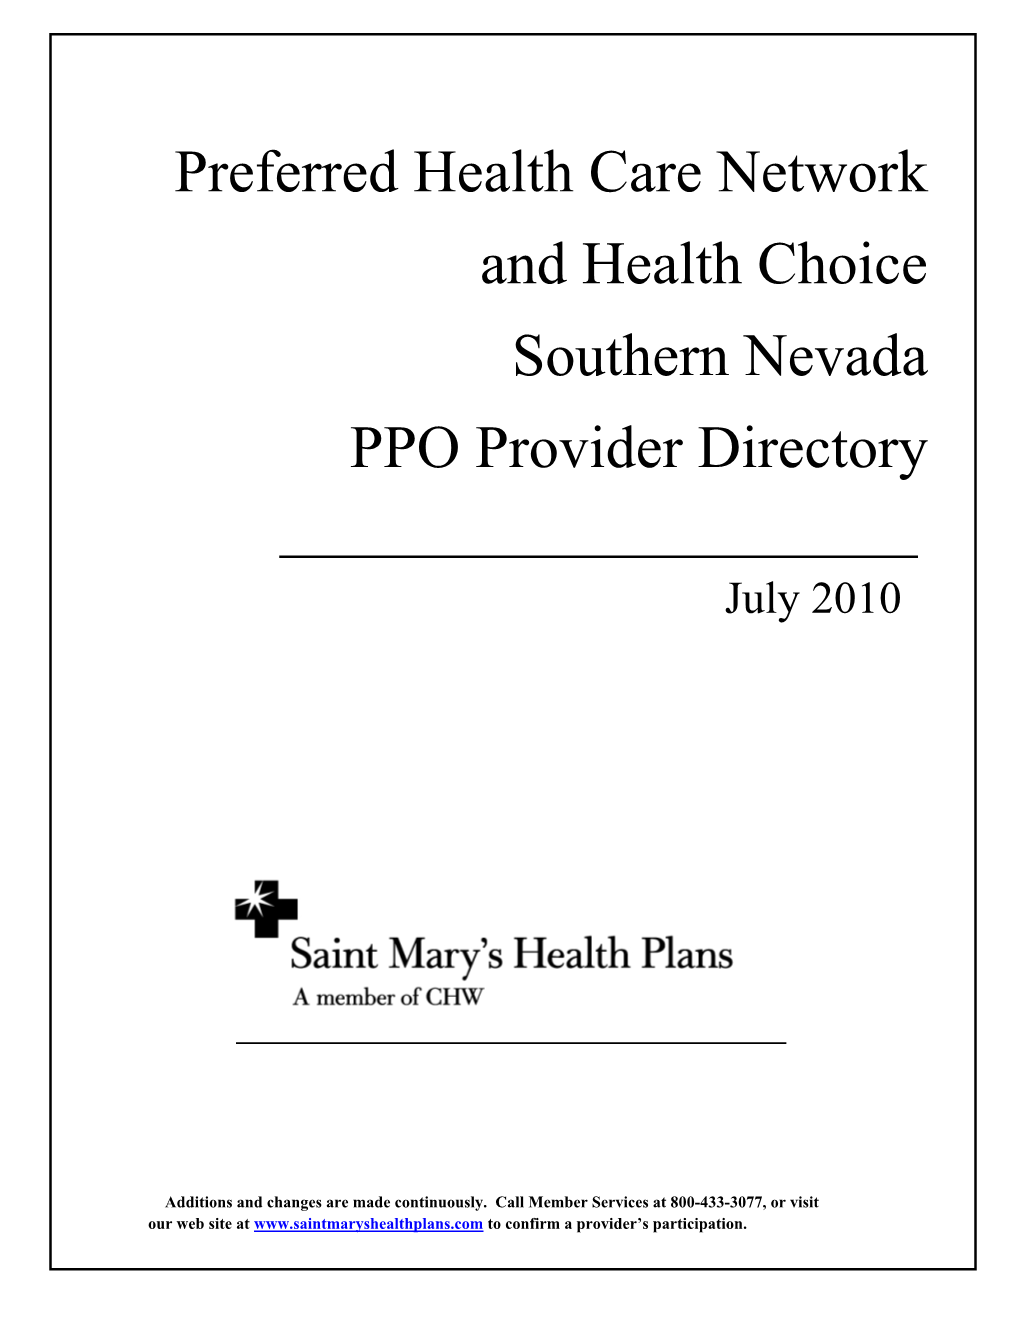 Preferred Health Care Network and Health Choice Southern Nevada PPO Provider Directory